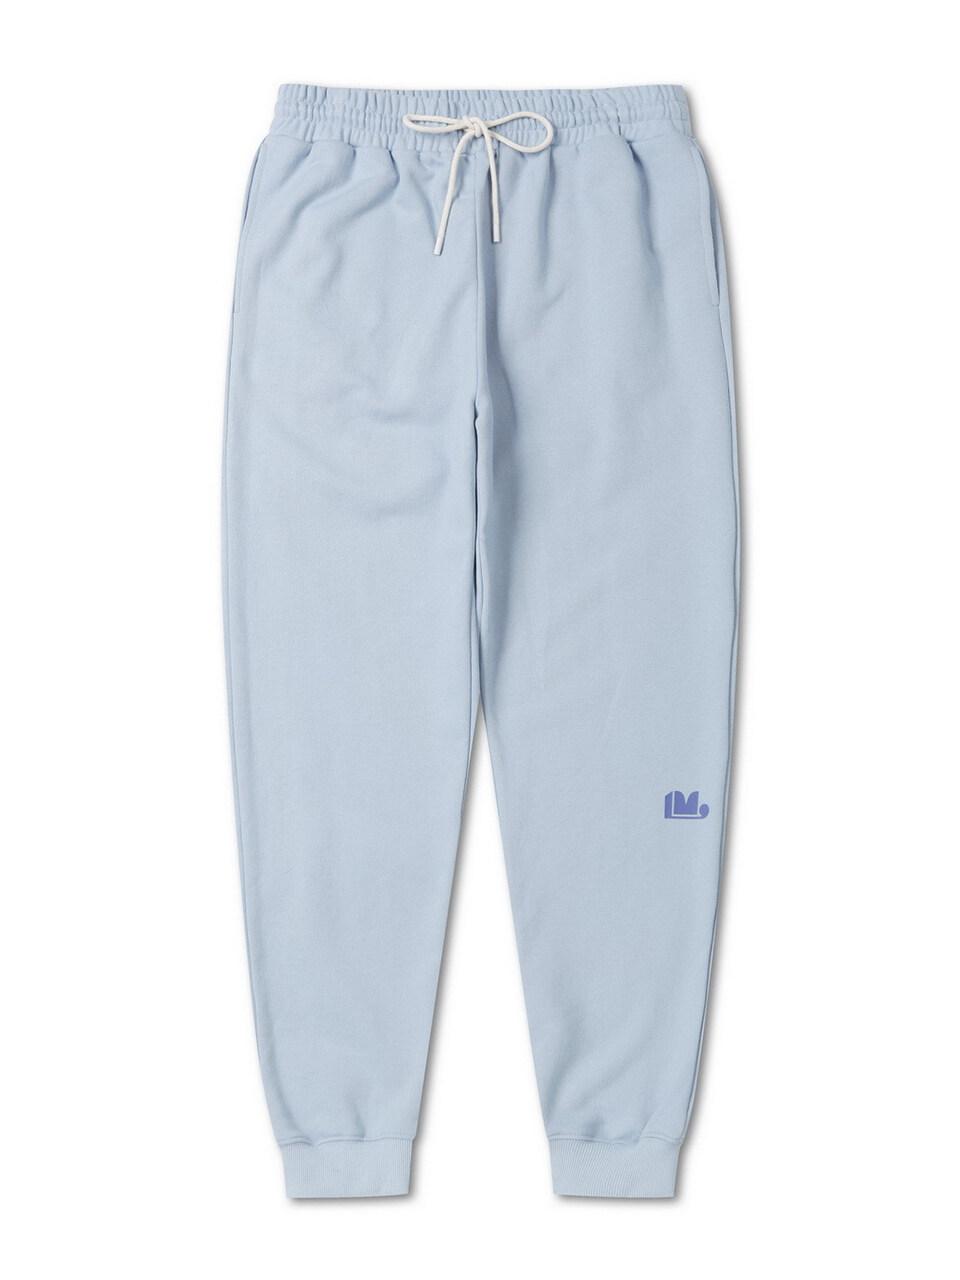 LUCKY MARCHE (qupnx21120bul) Lm Logo jogger Sweat Pant_ in Marine Blue  (Blue) | Lyst